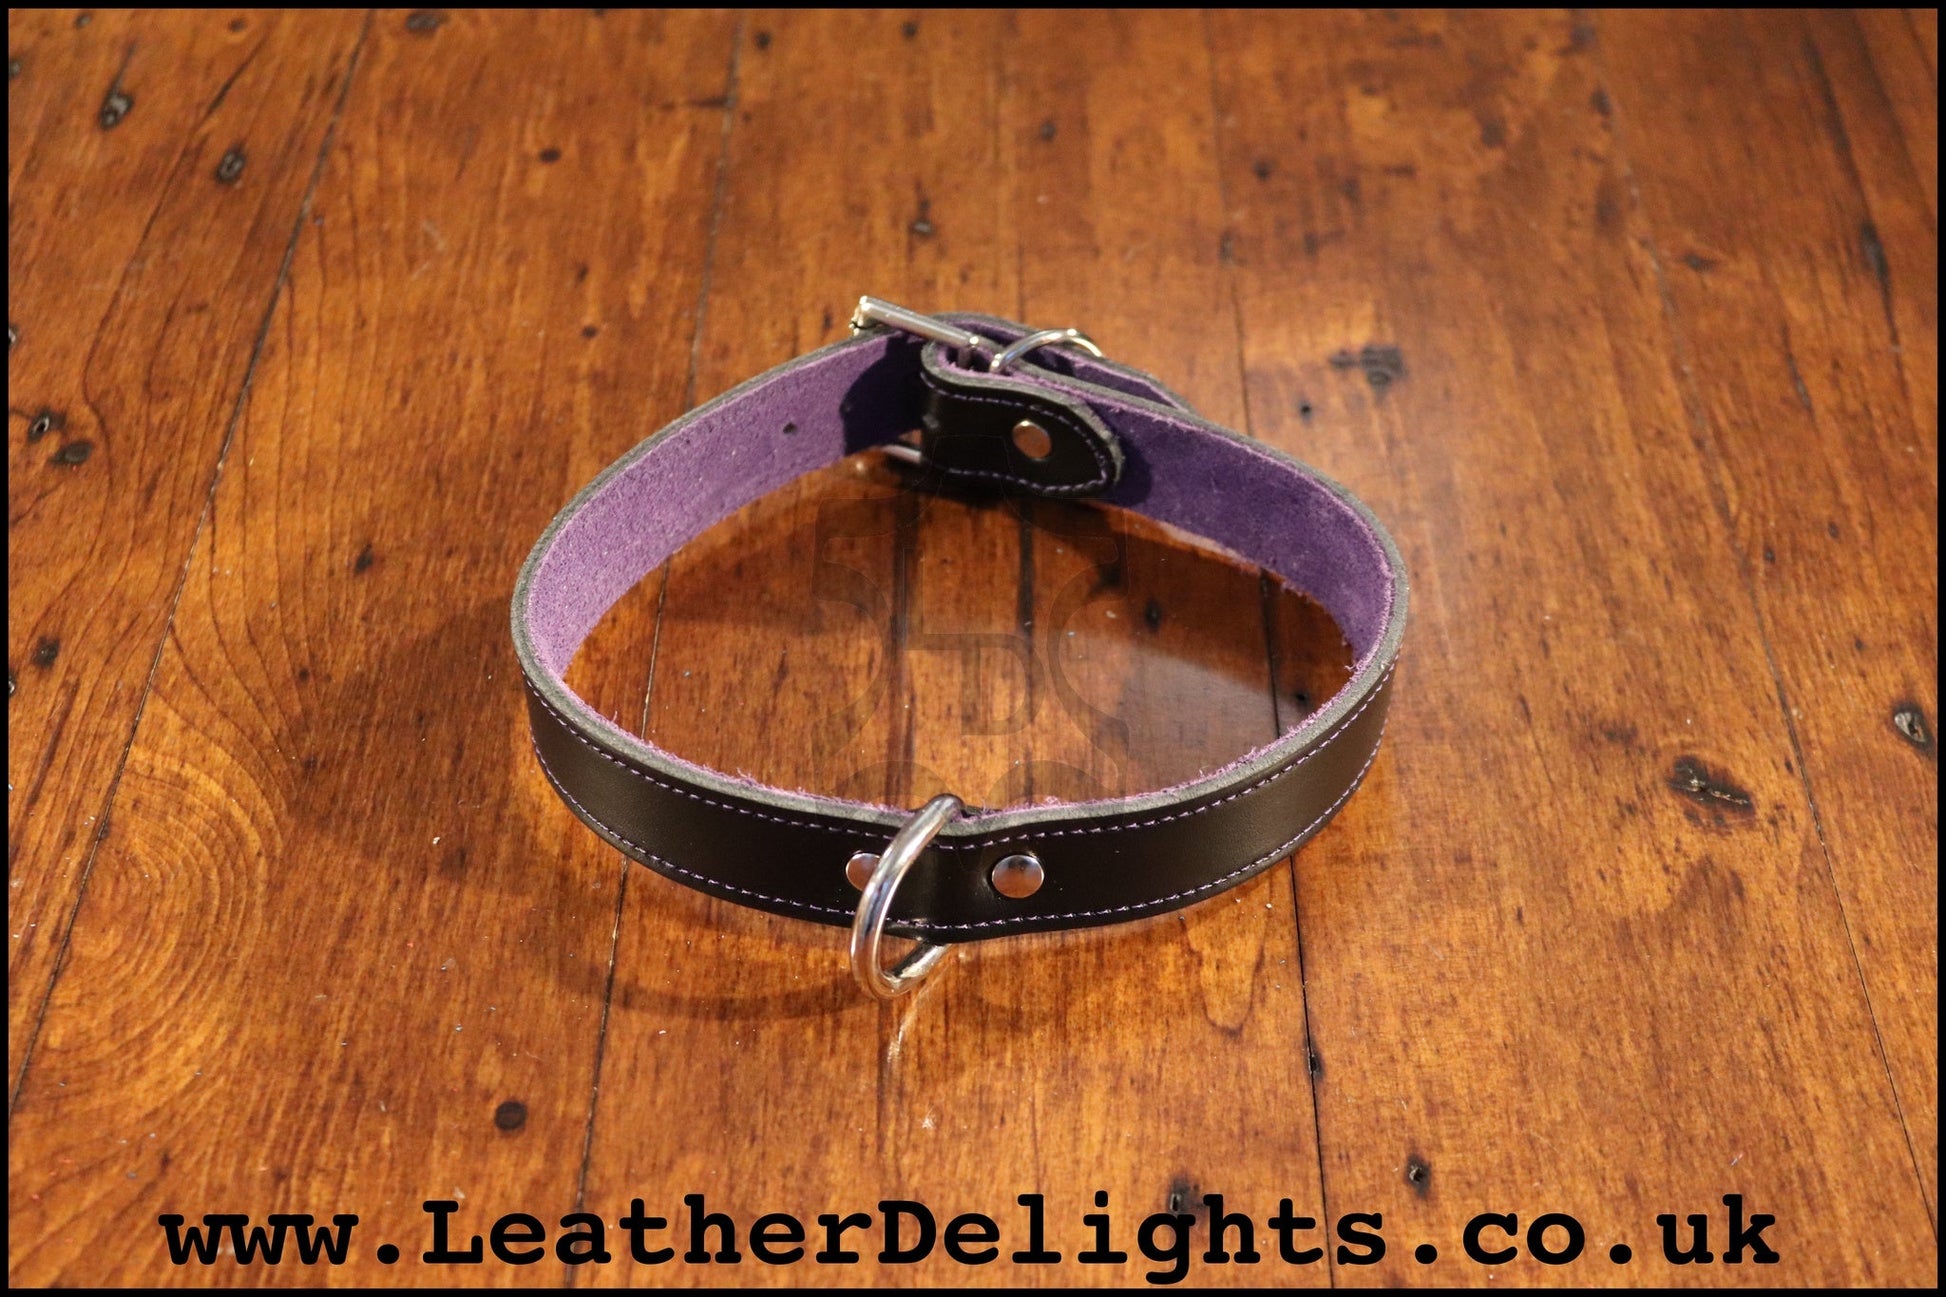 1" Wide Collar with Welded D Ring - Leather Delights